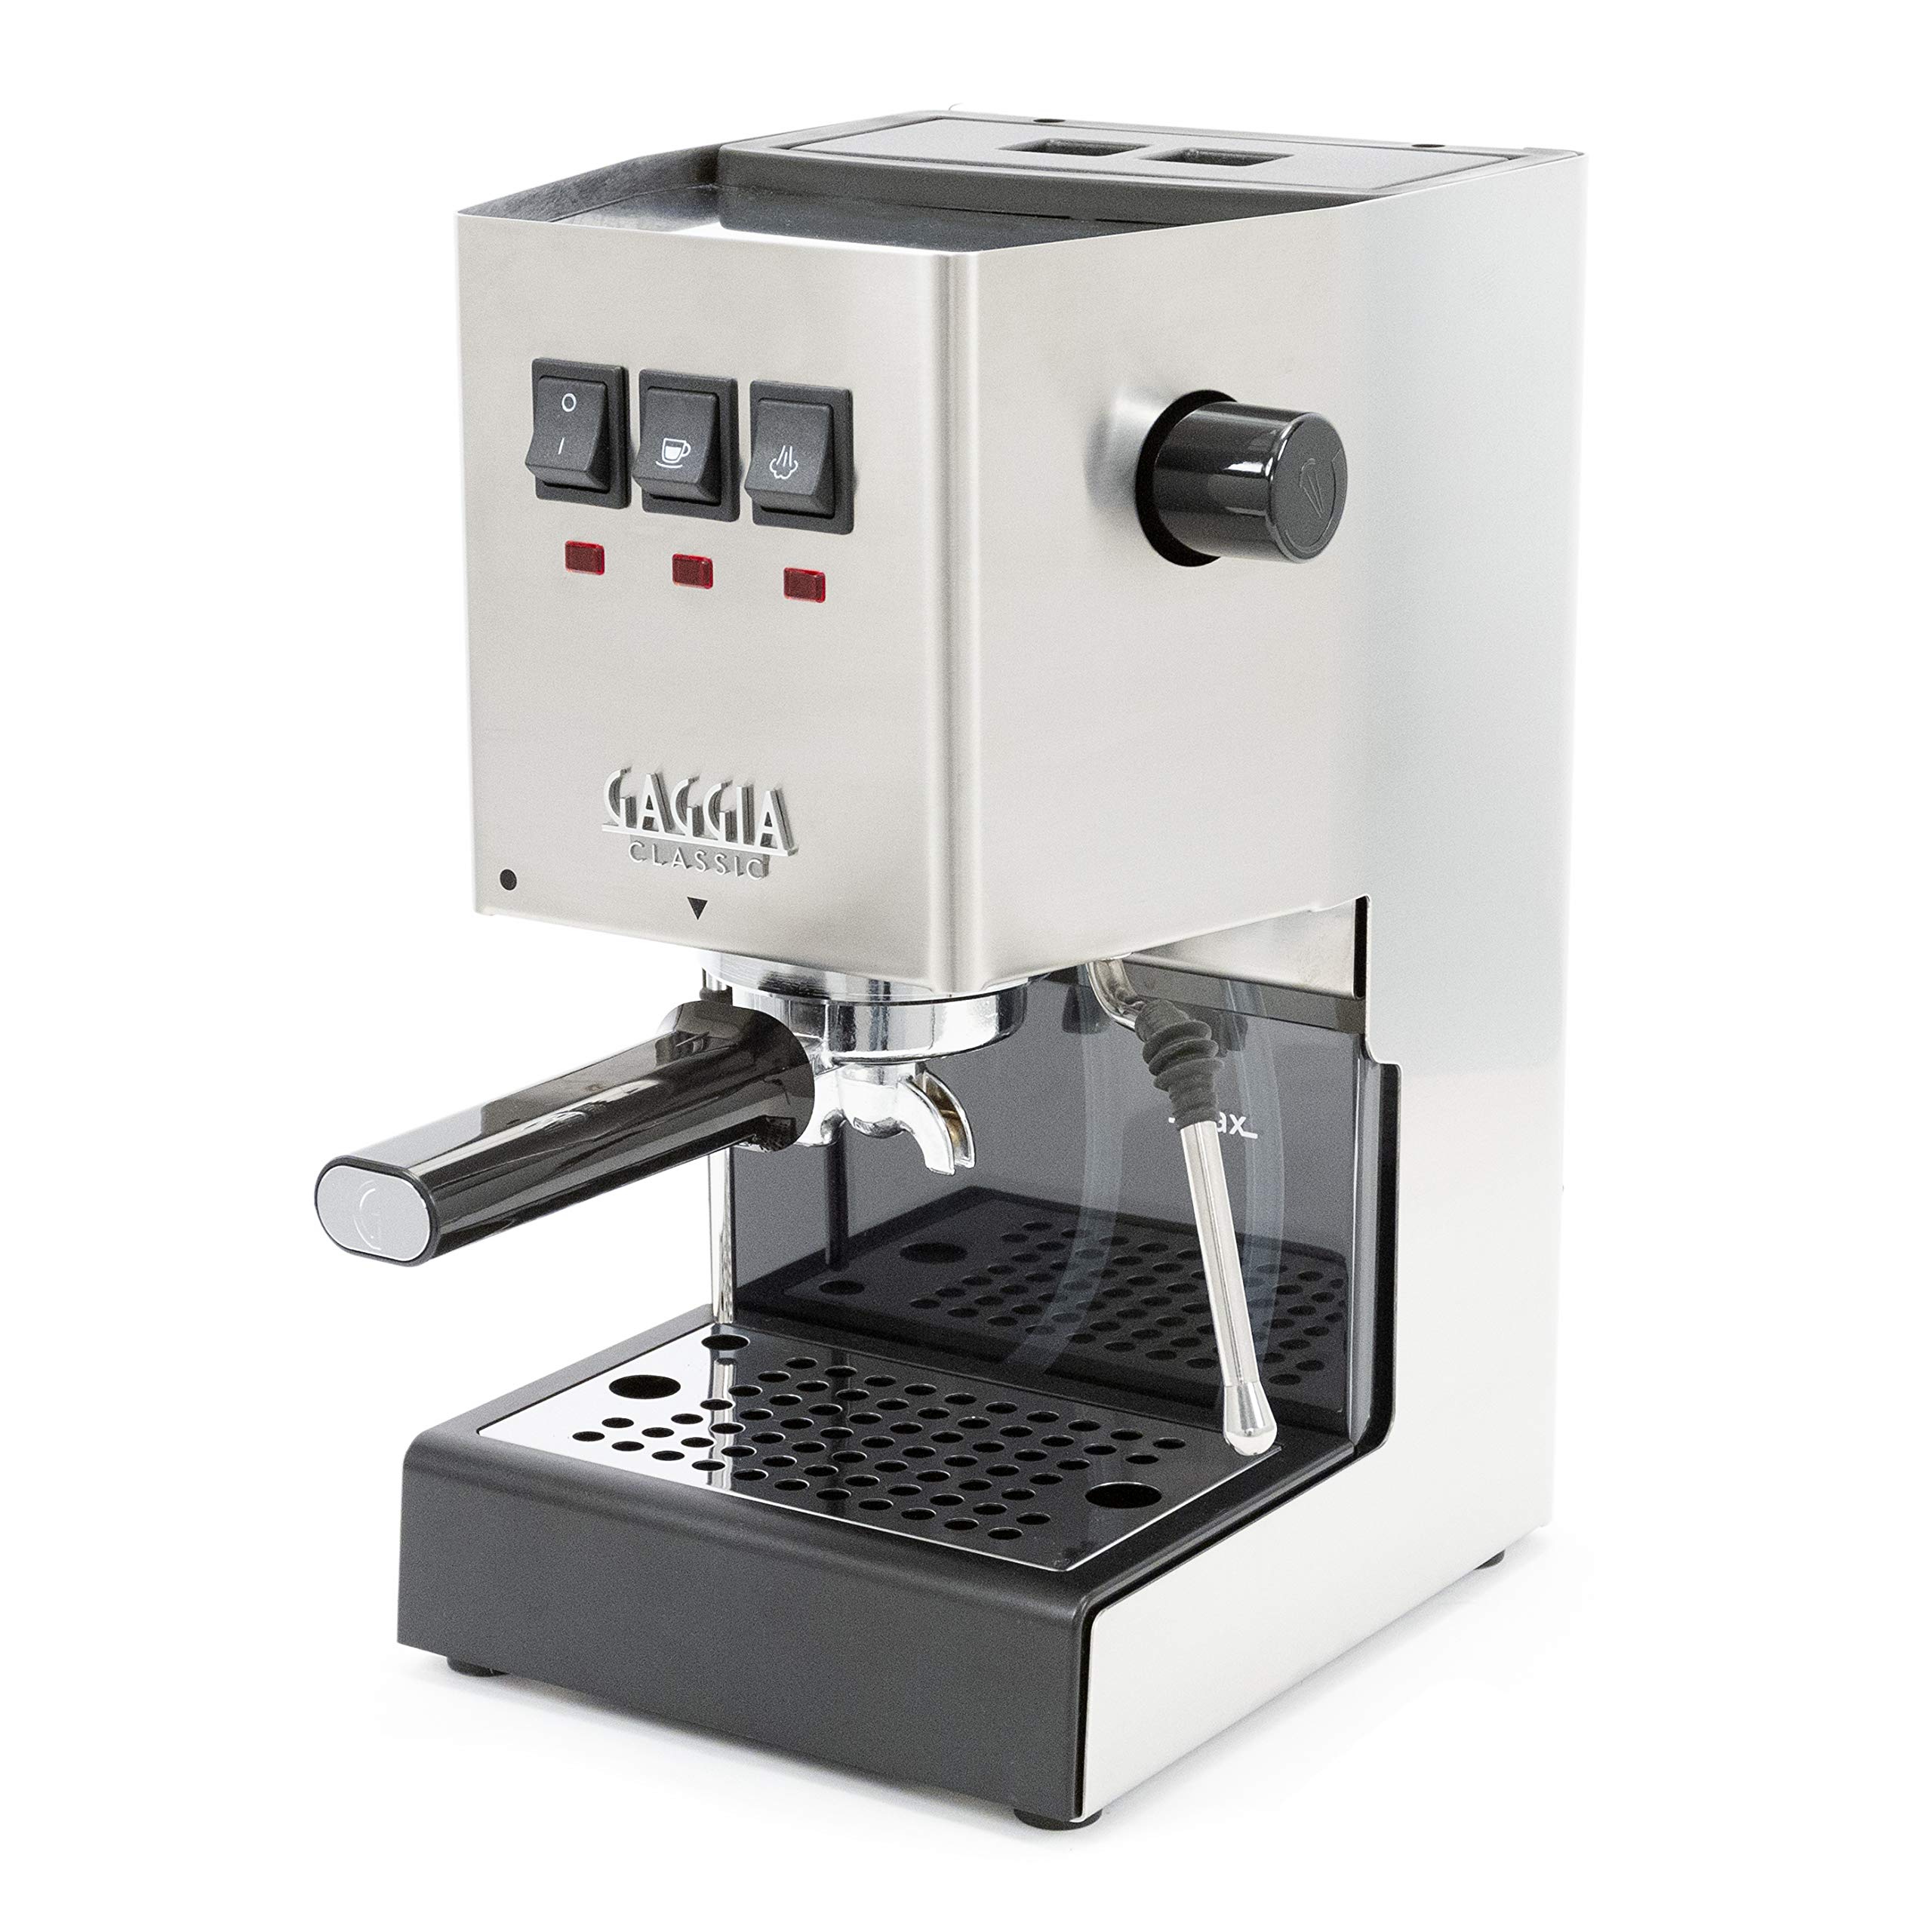 Get Your Caffeine Fix with These Five Fantastic Espresso Makers